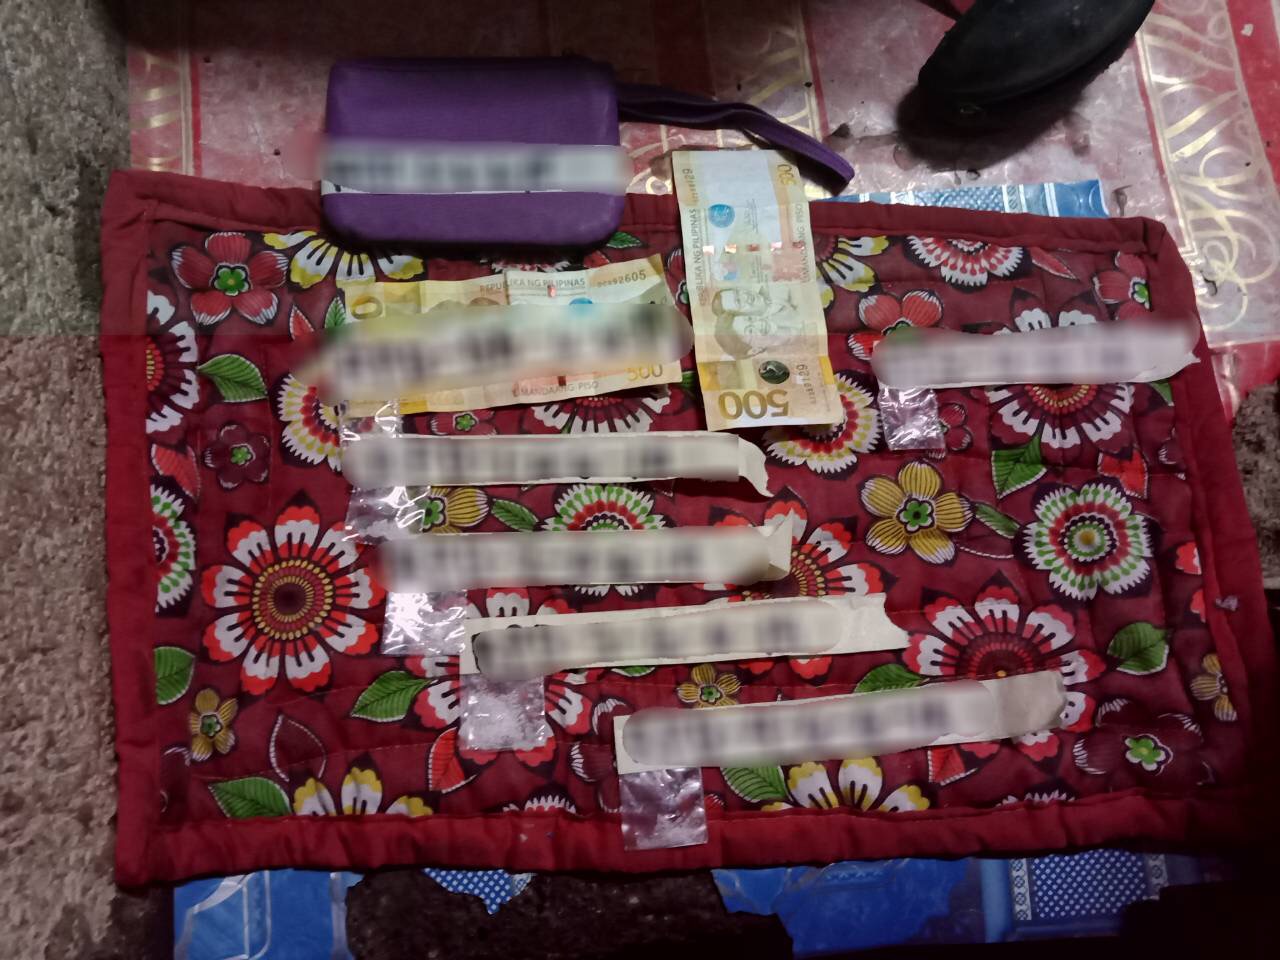 Substances and cash confiscated from the suspects. Photo from Marikina police